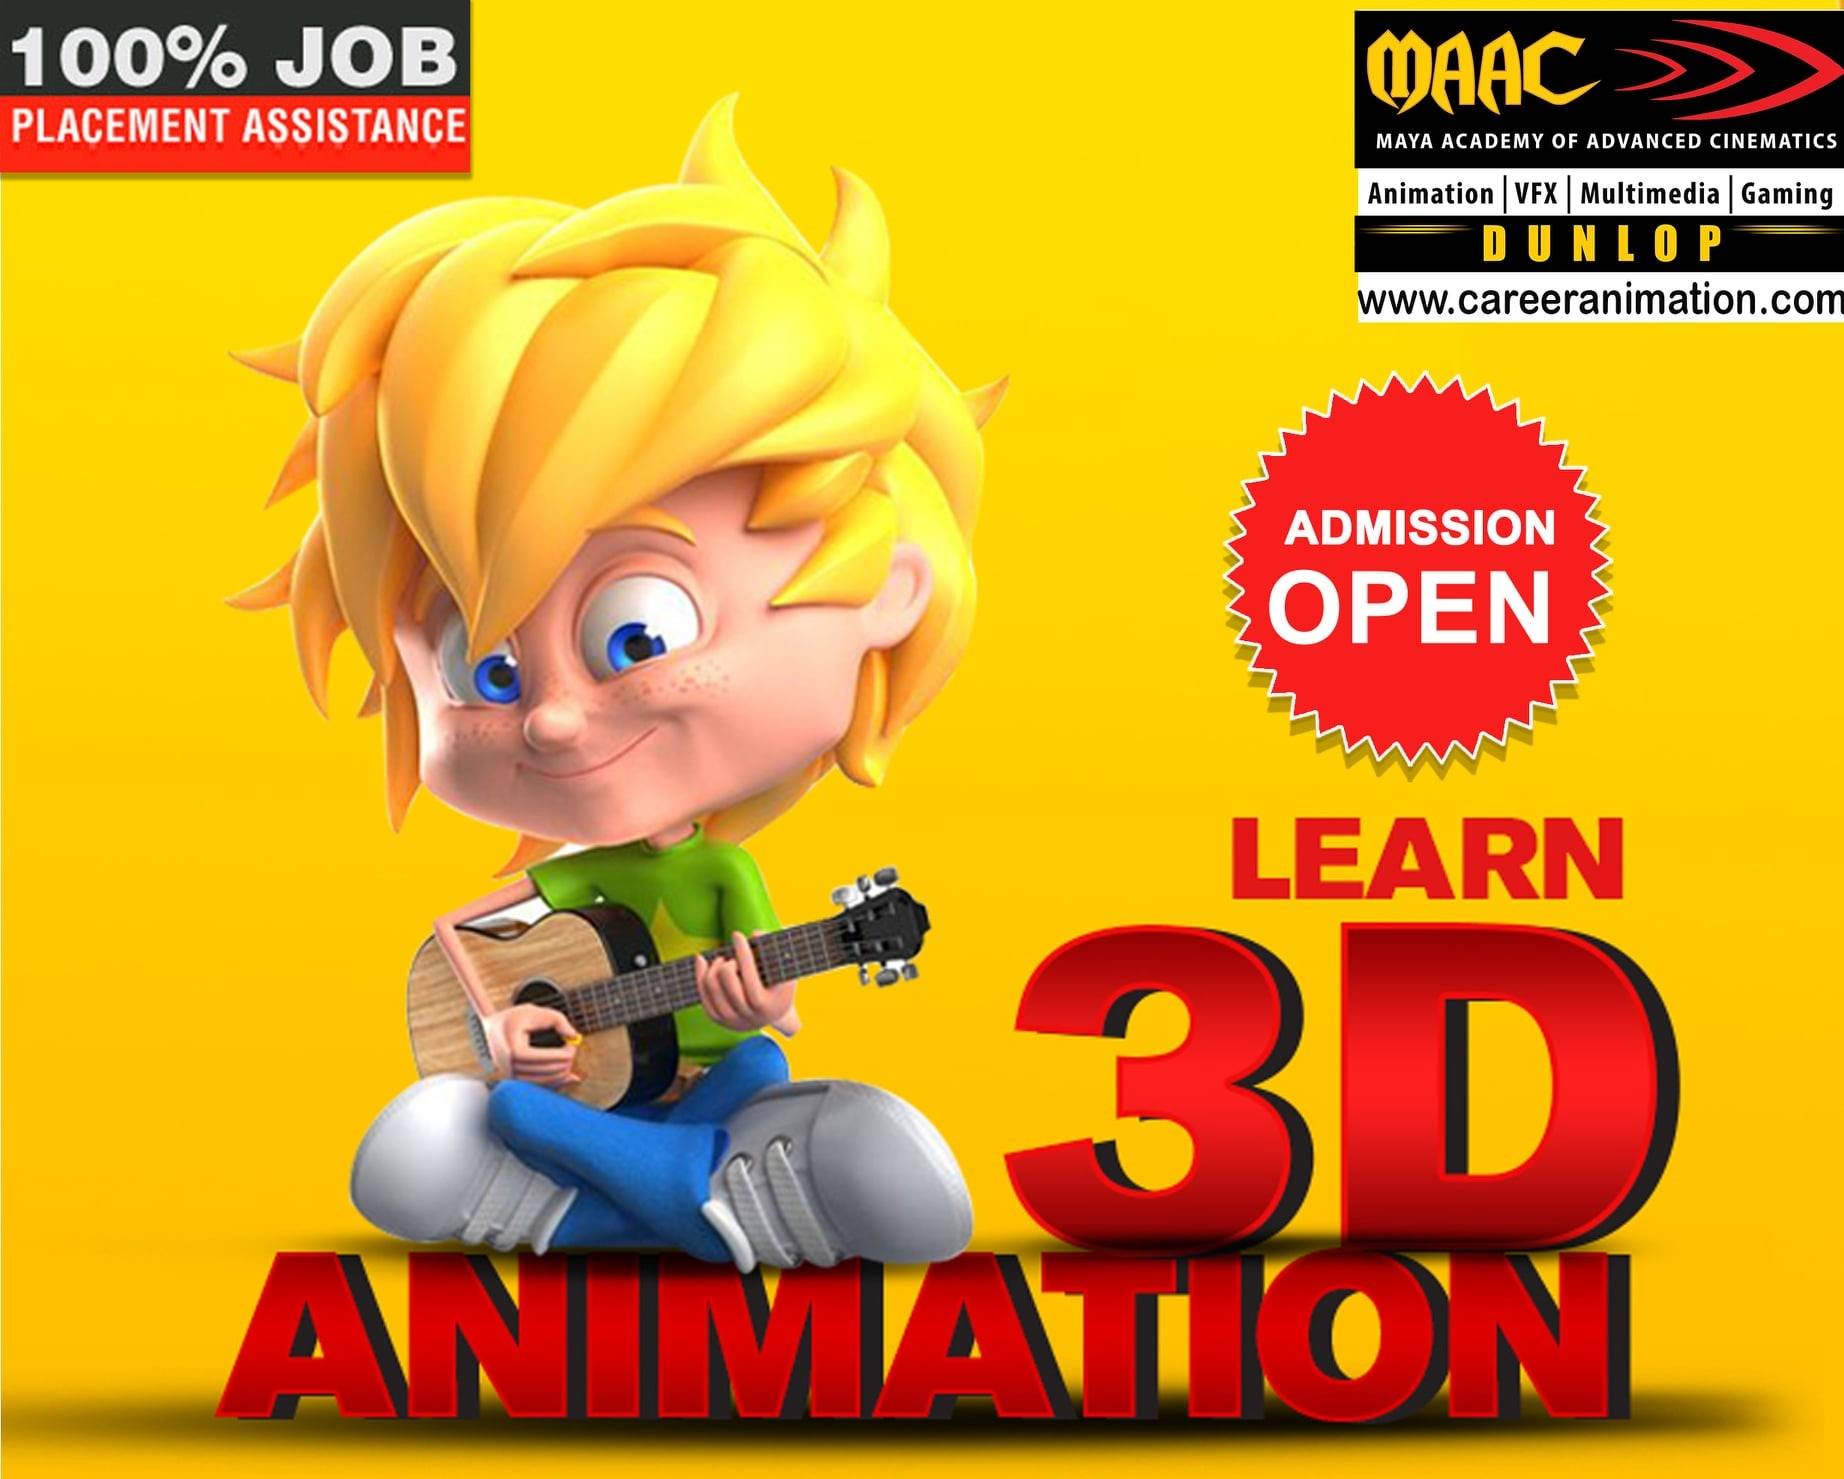 You are currently viewing Why settle for 2D when you can go 3D? Learn 3D Animation and unlock a whole new world of creativity!